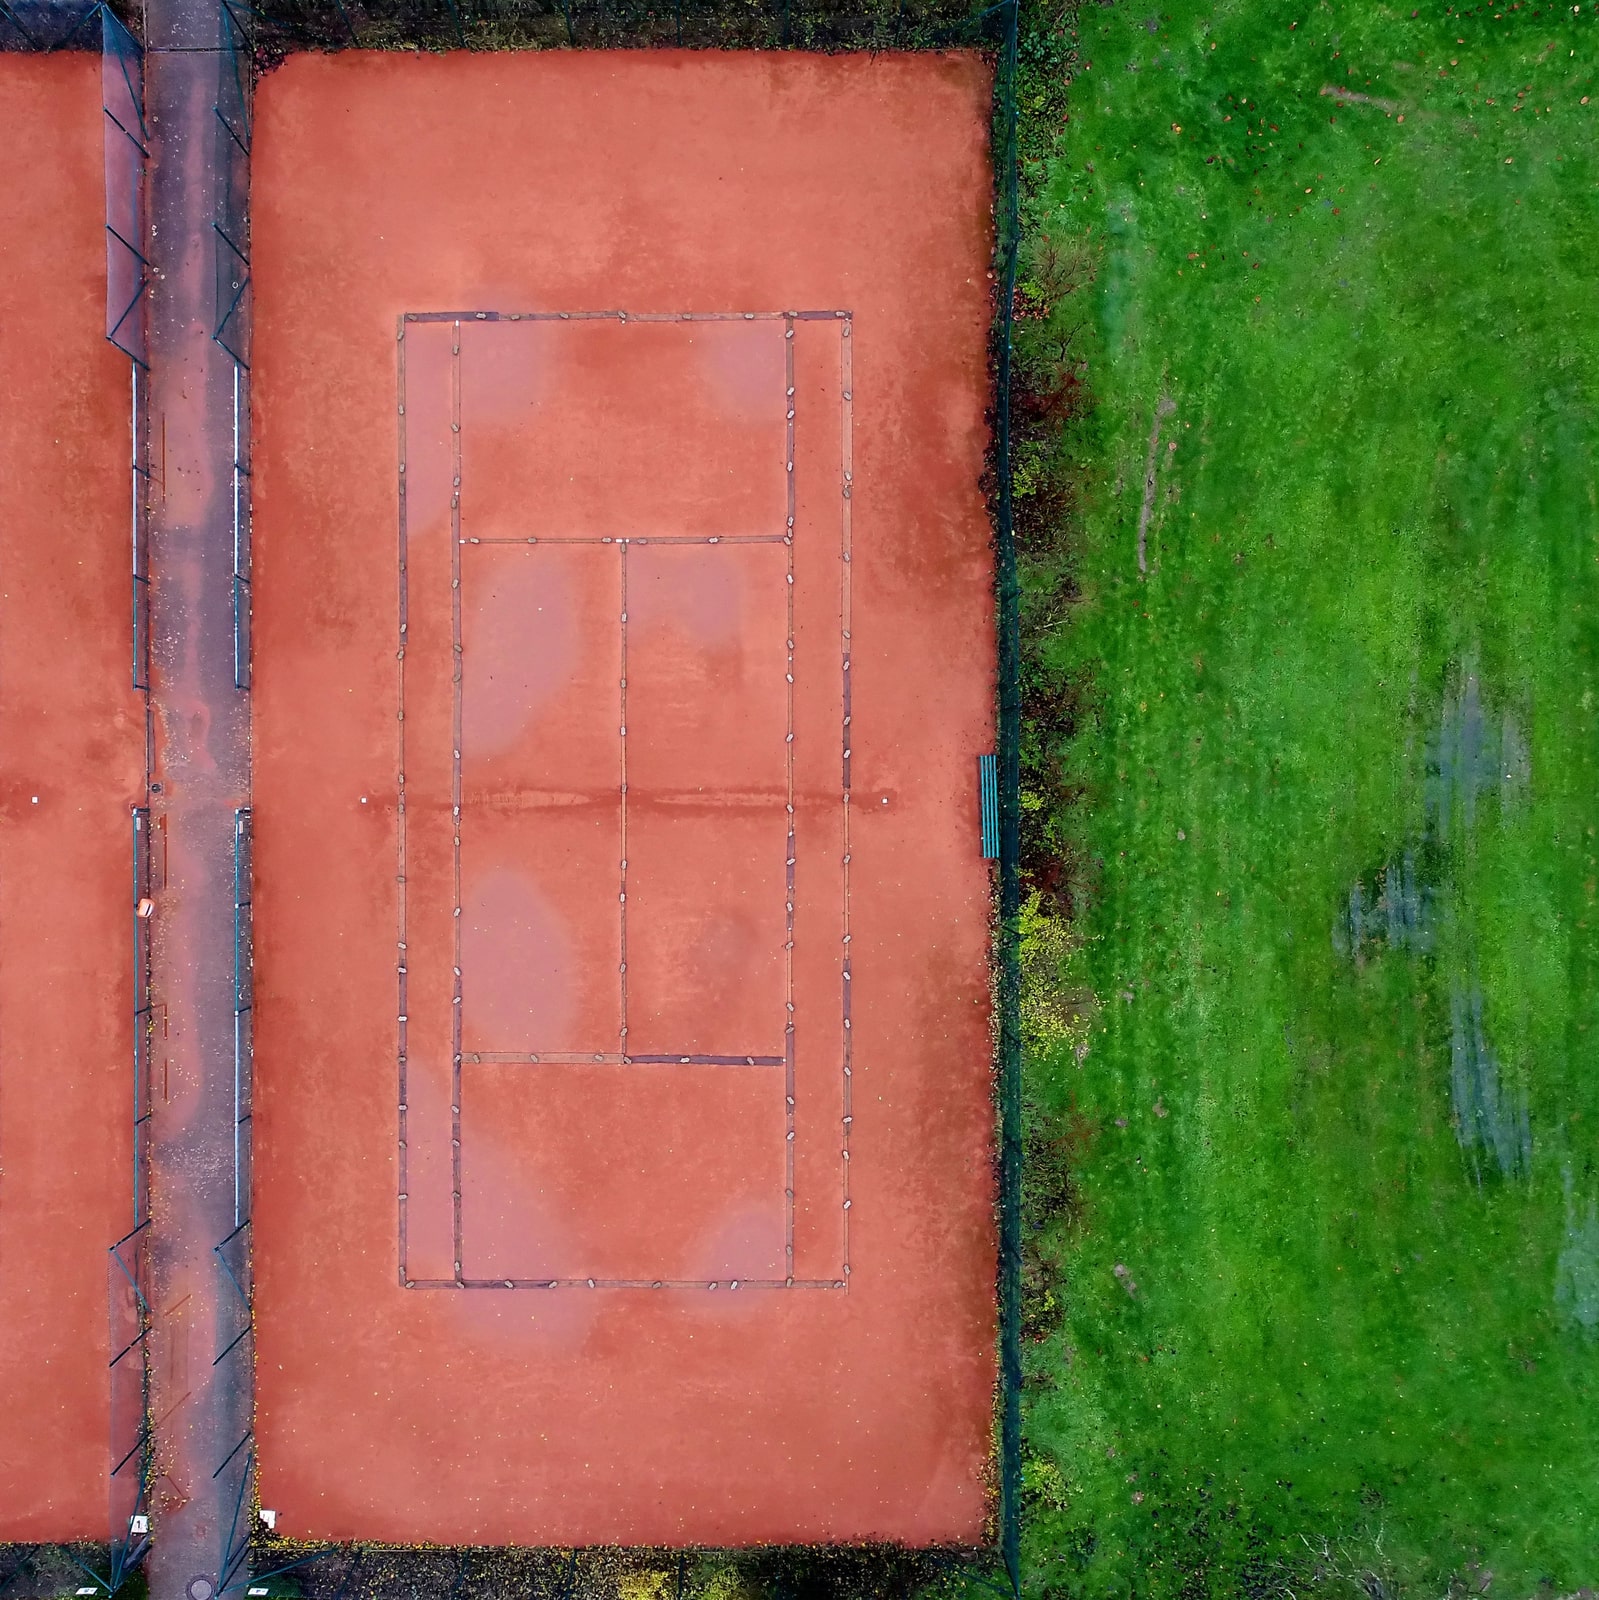 tennis-court-with-red-gravel